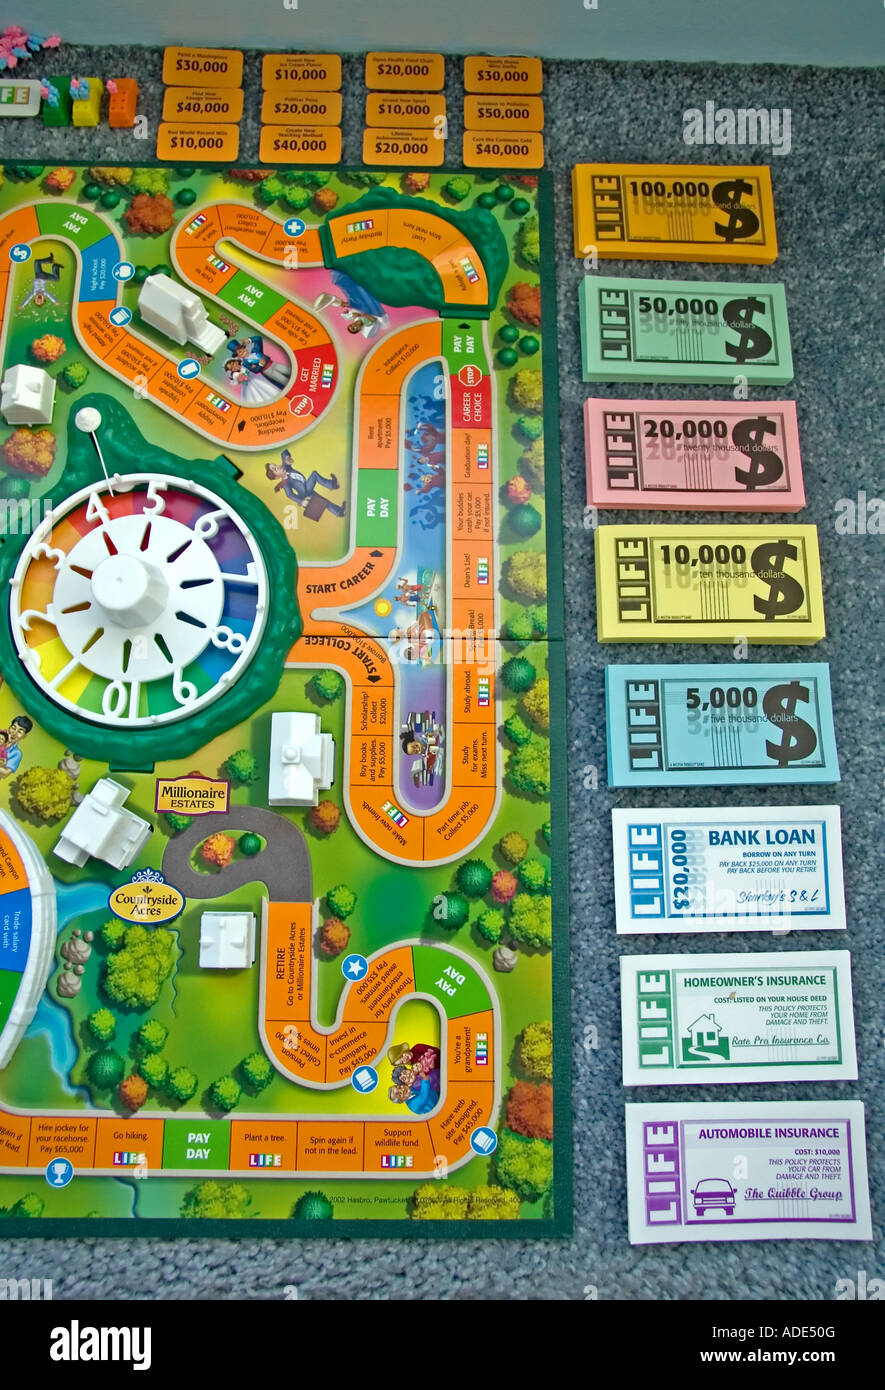 game of life board